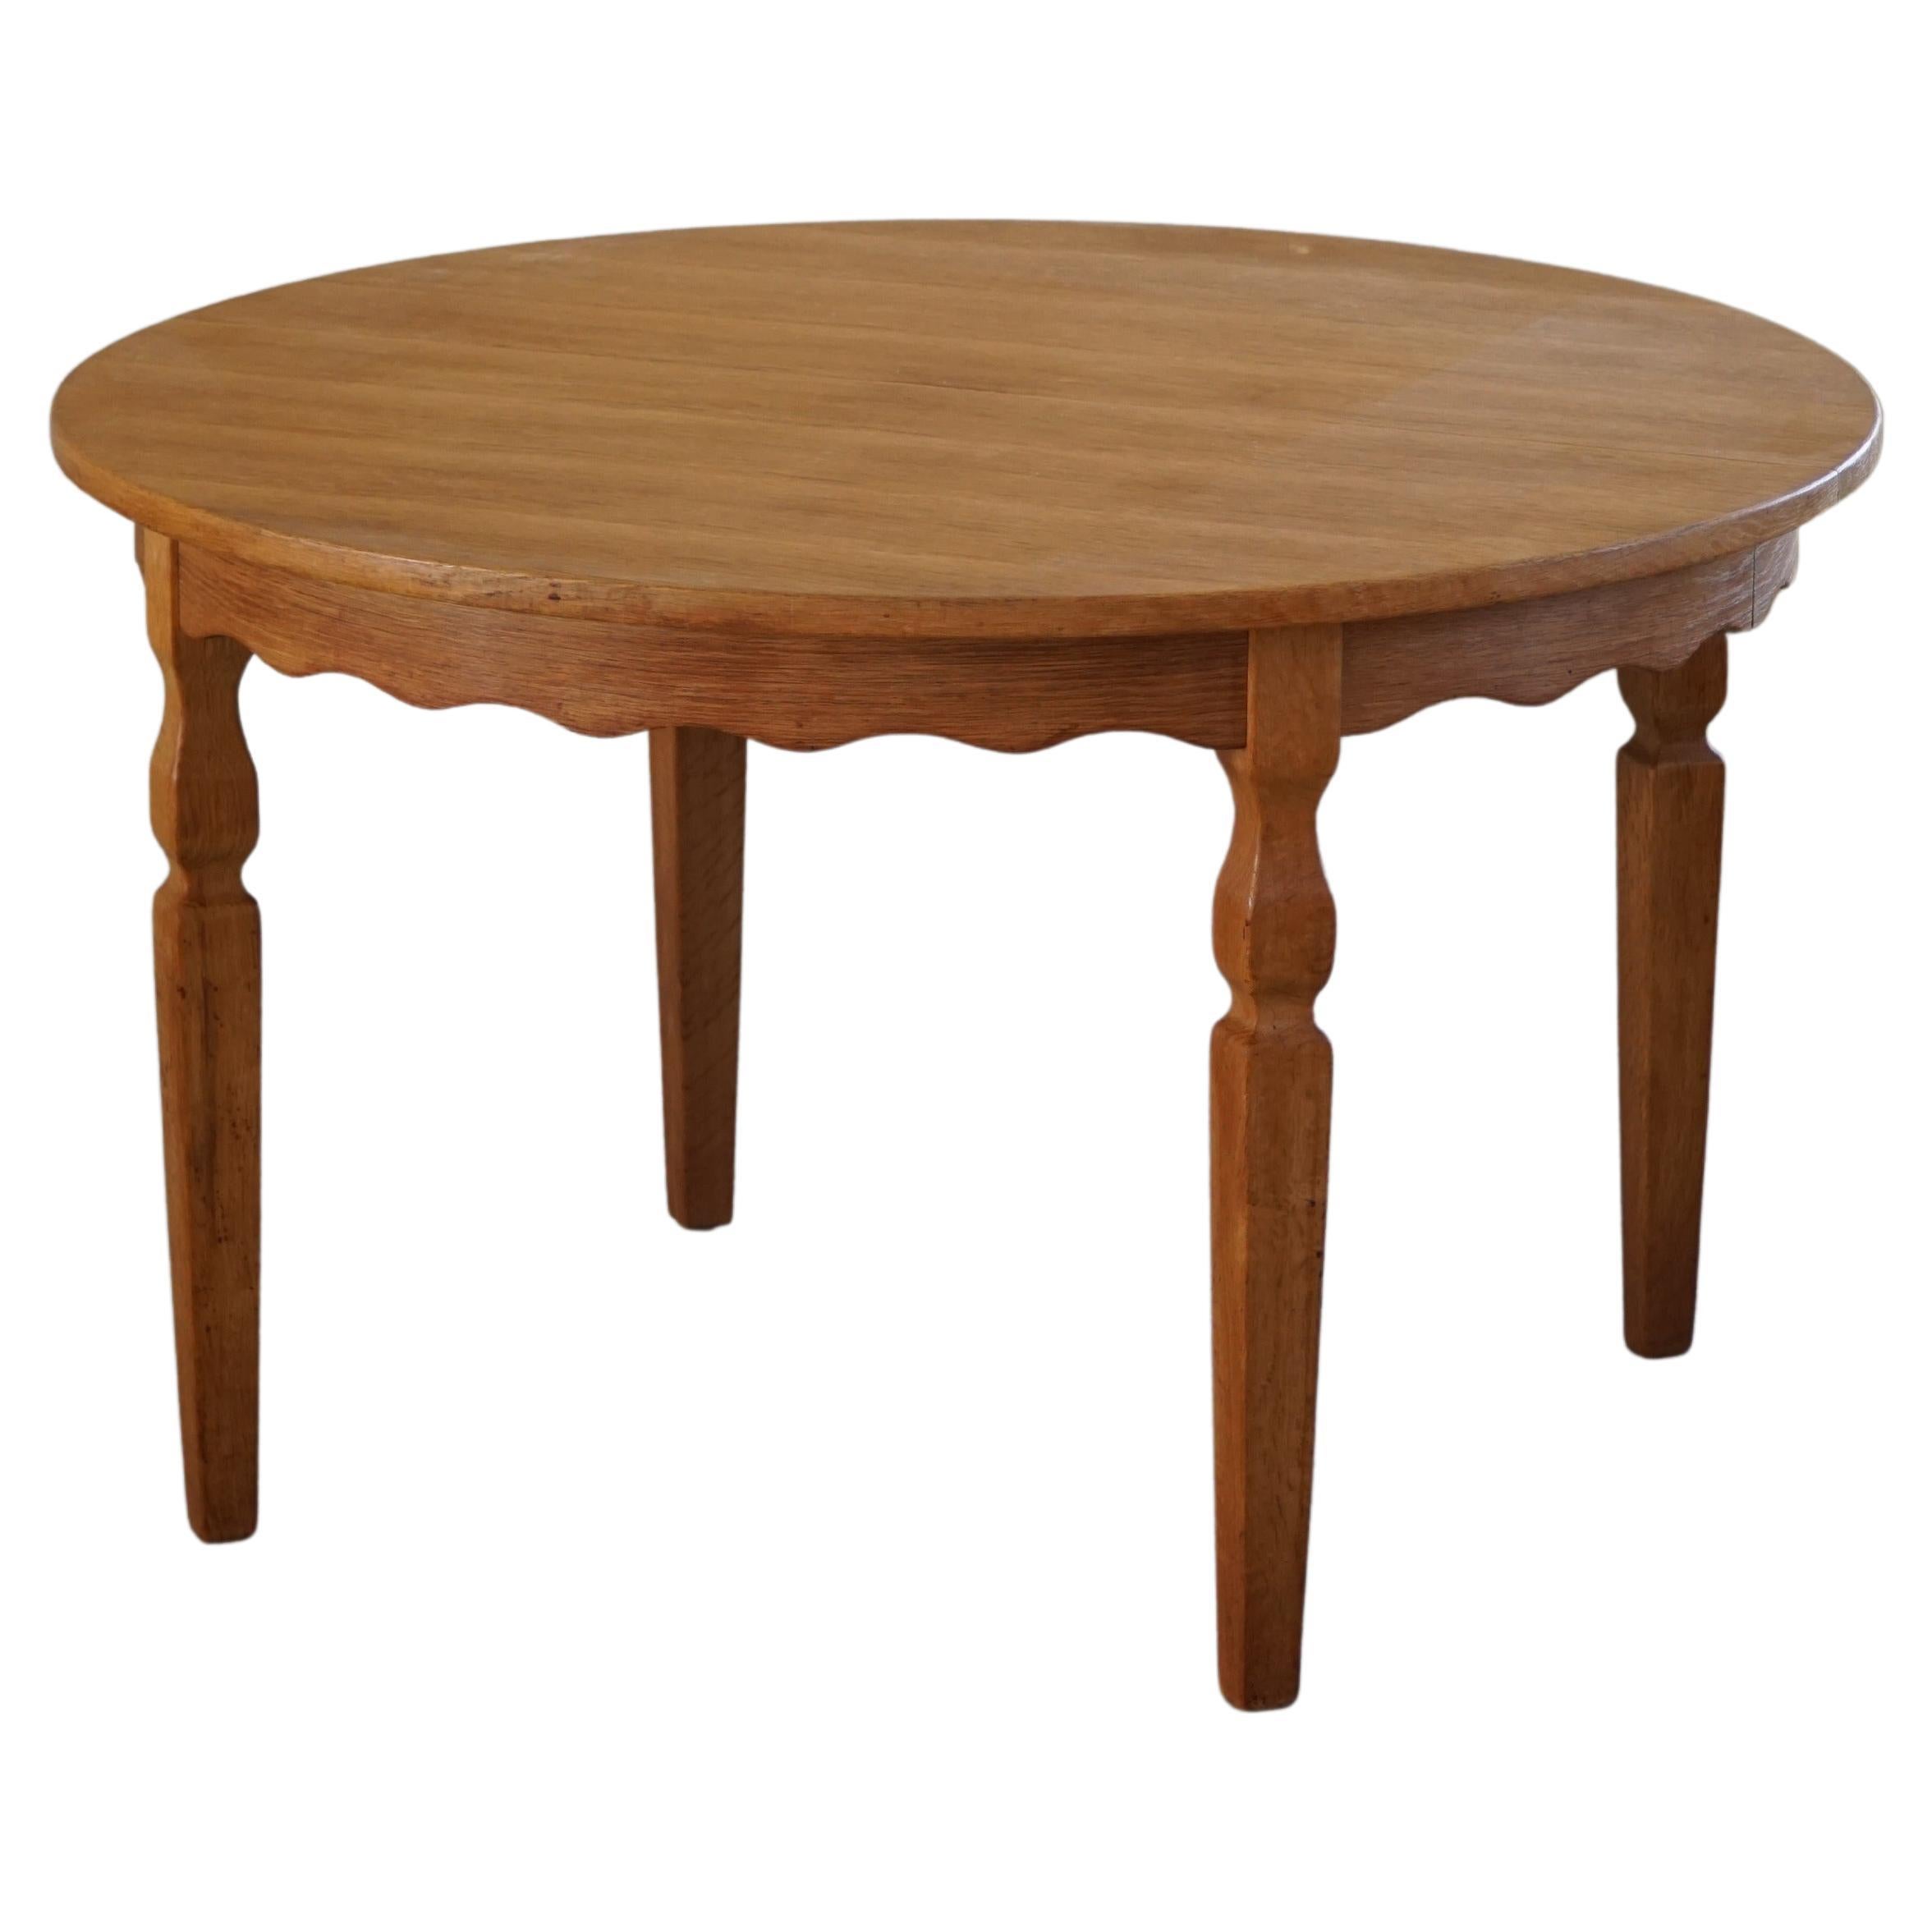 Round Dining Table with Two Extensions, Made in Oak, Danish Cabinetmaker, 1960s